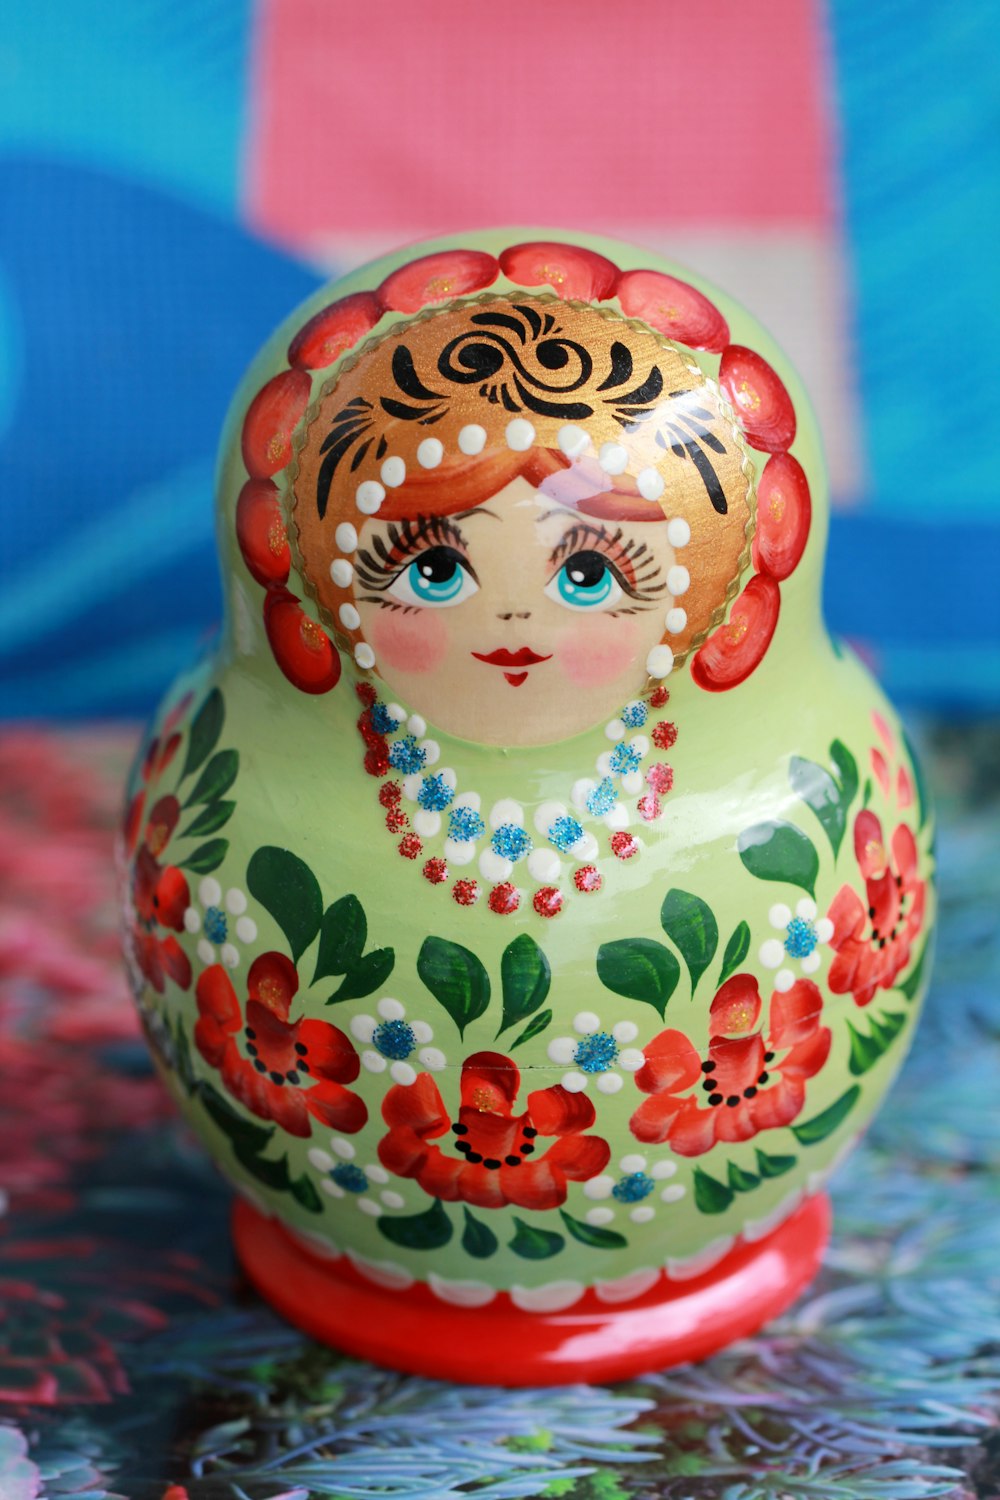 red and white floral ceramic figurine